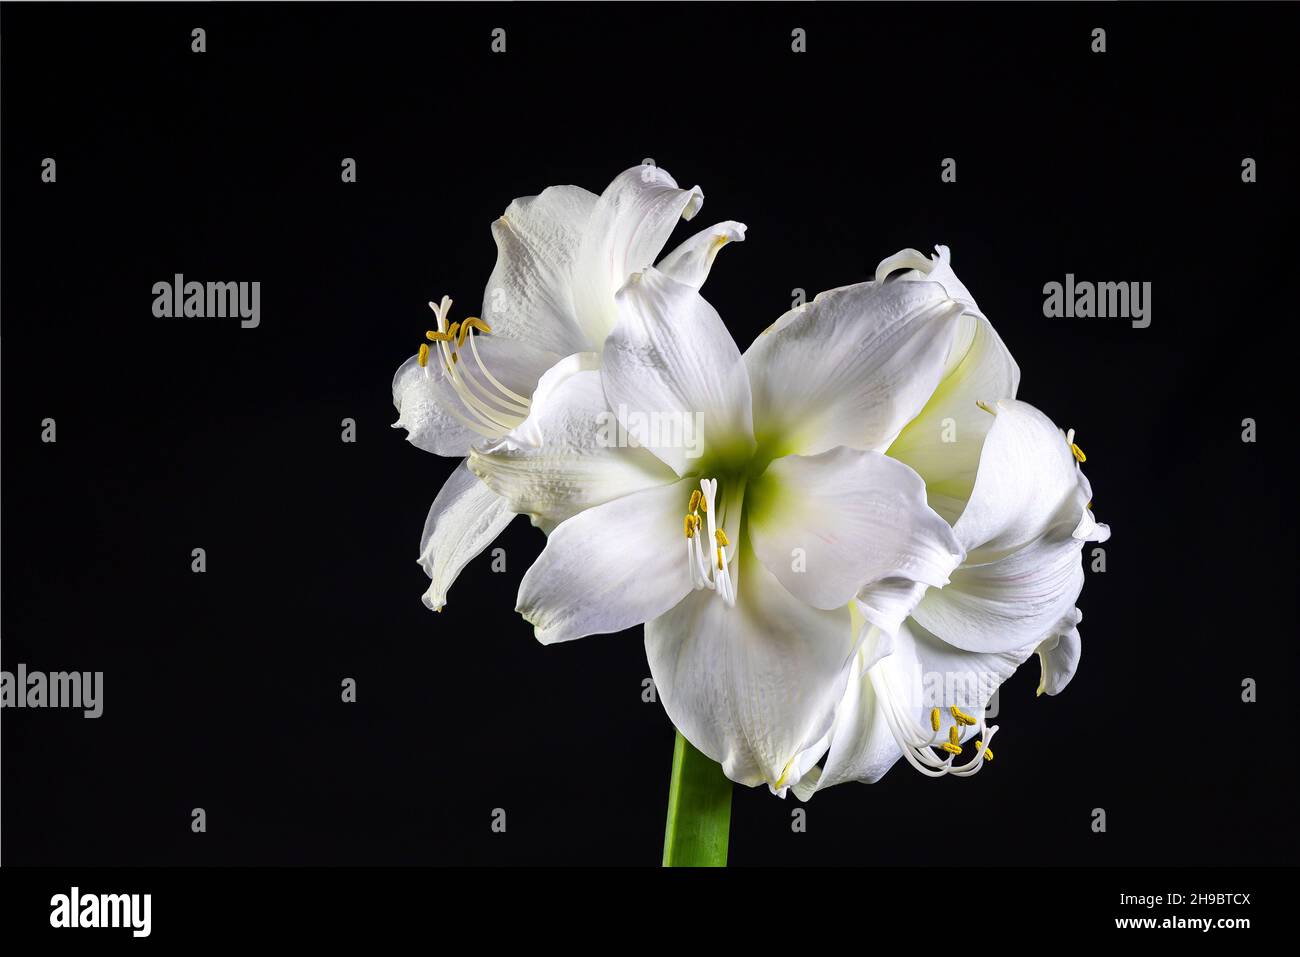 A white Amaryllis flower in full bloom Stock Photo